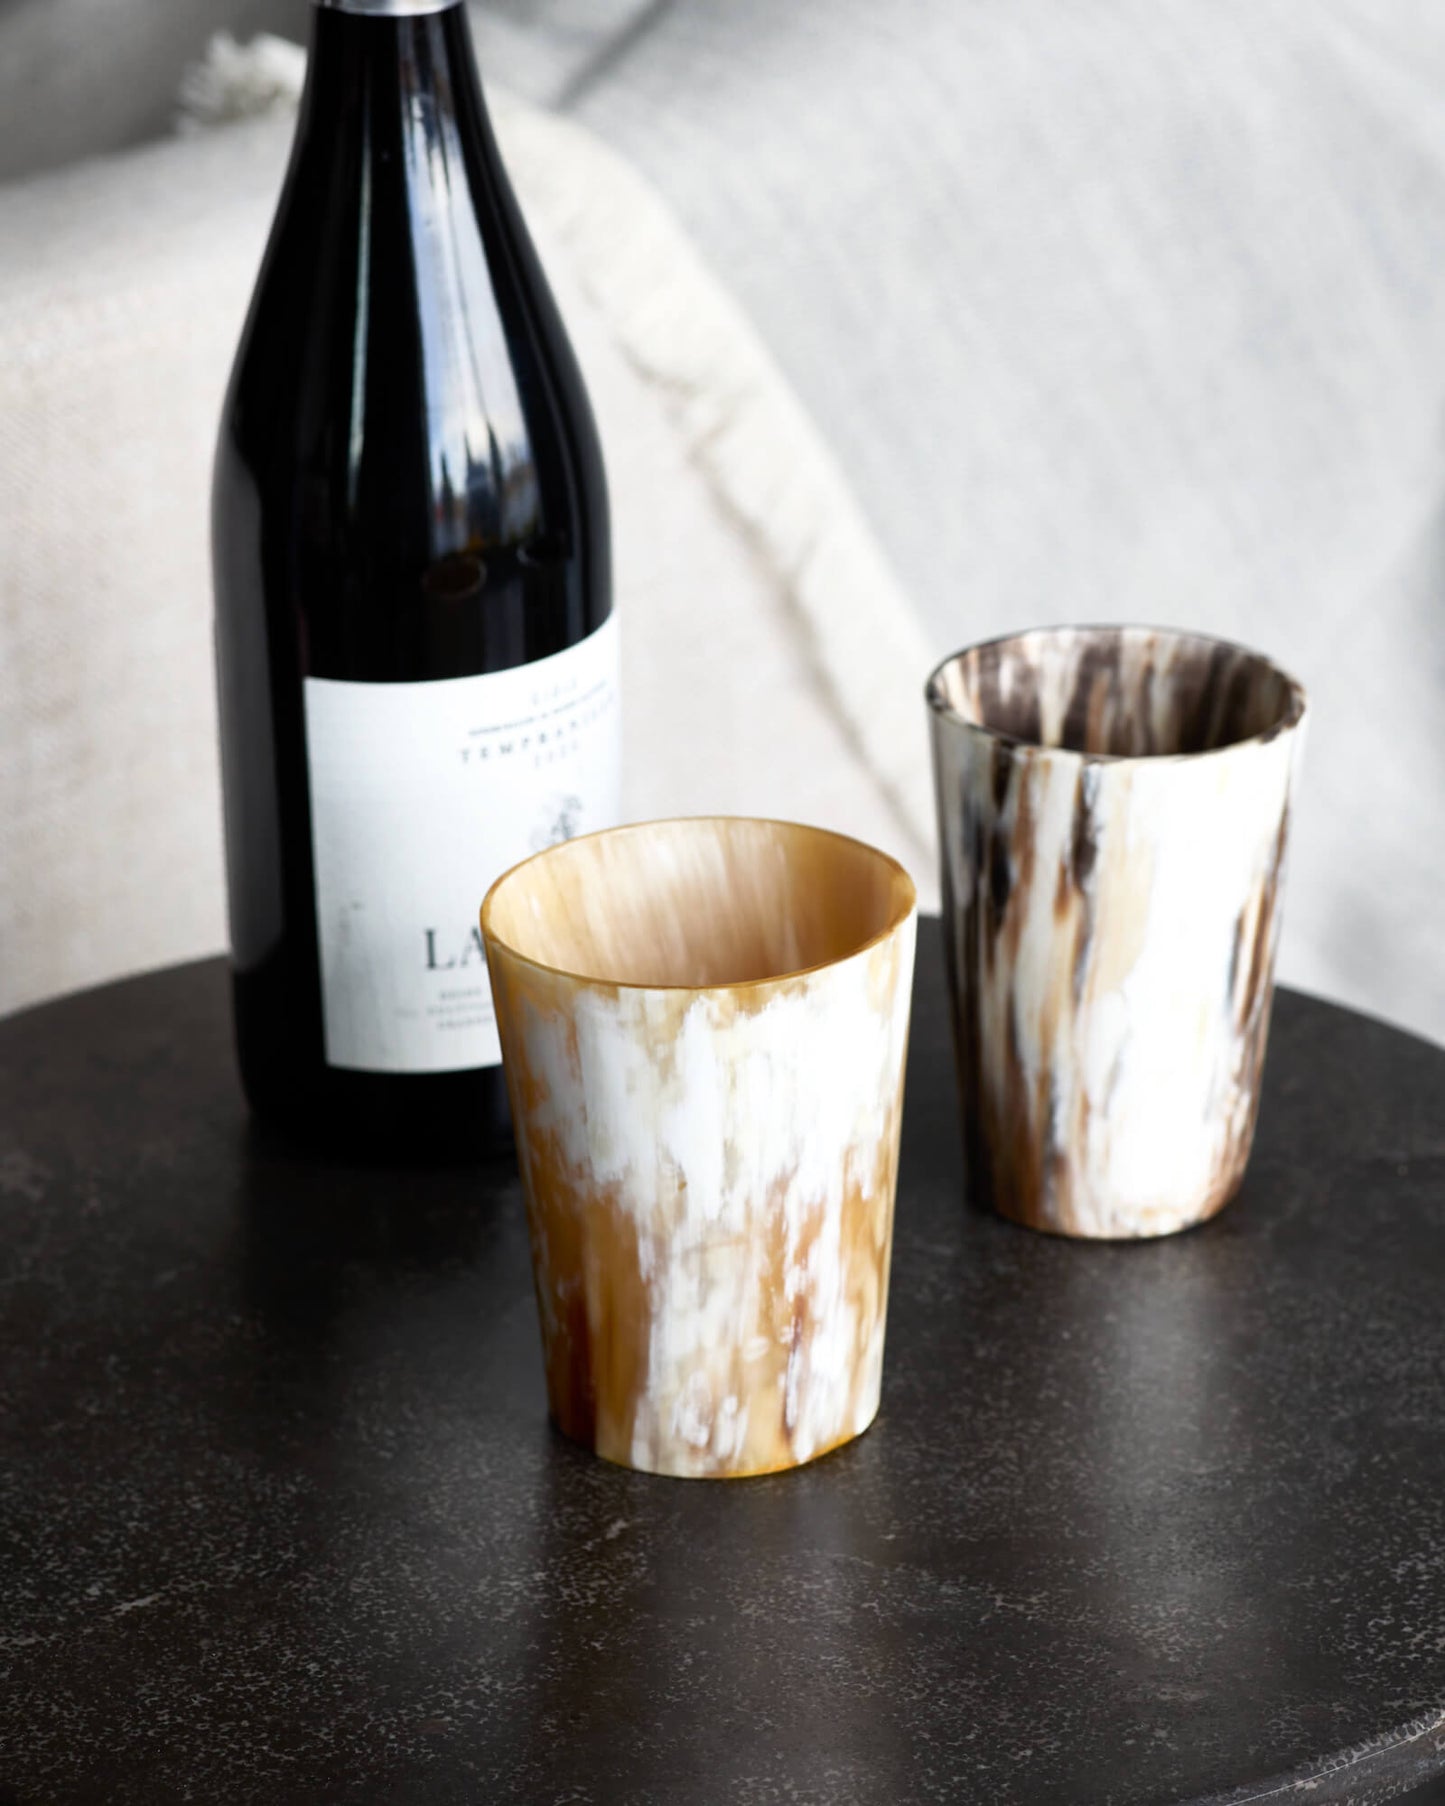 
                  
                    Fairkind's Ankole Horn Collection tumbler set in light with a bottle of wine. Made in Uganda in partnership with Fairkind.
                  
                